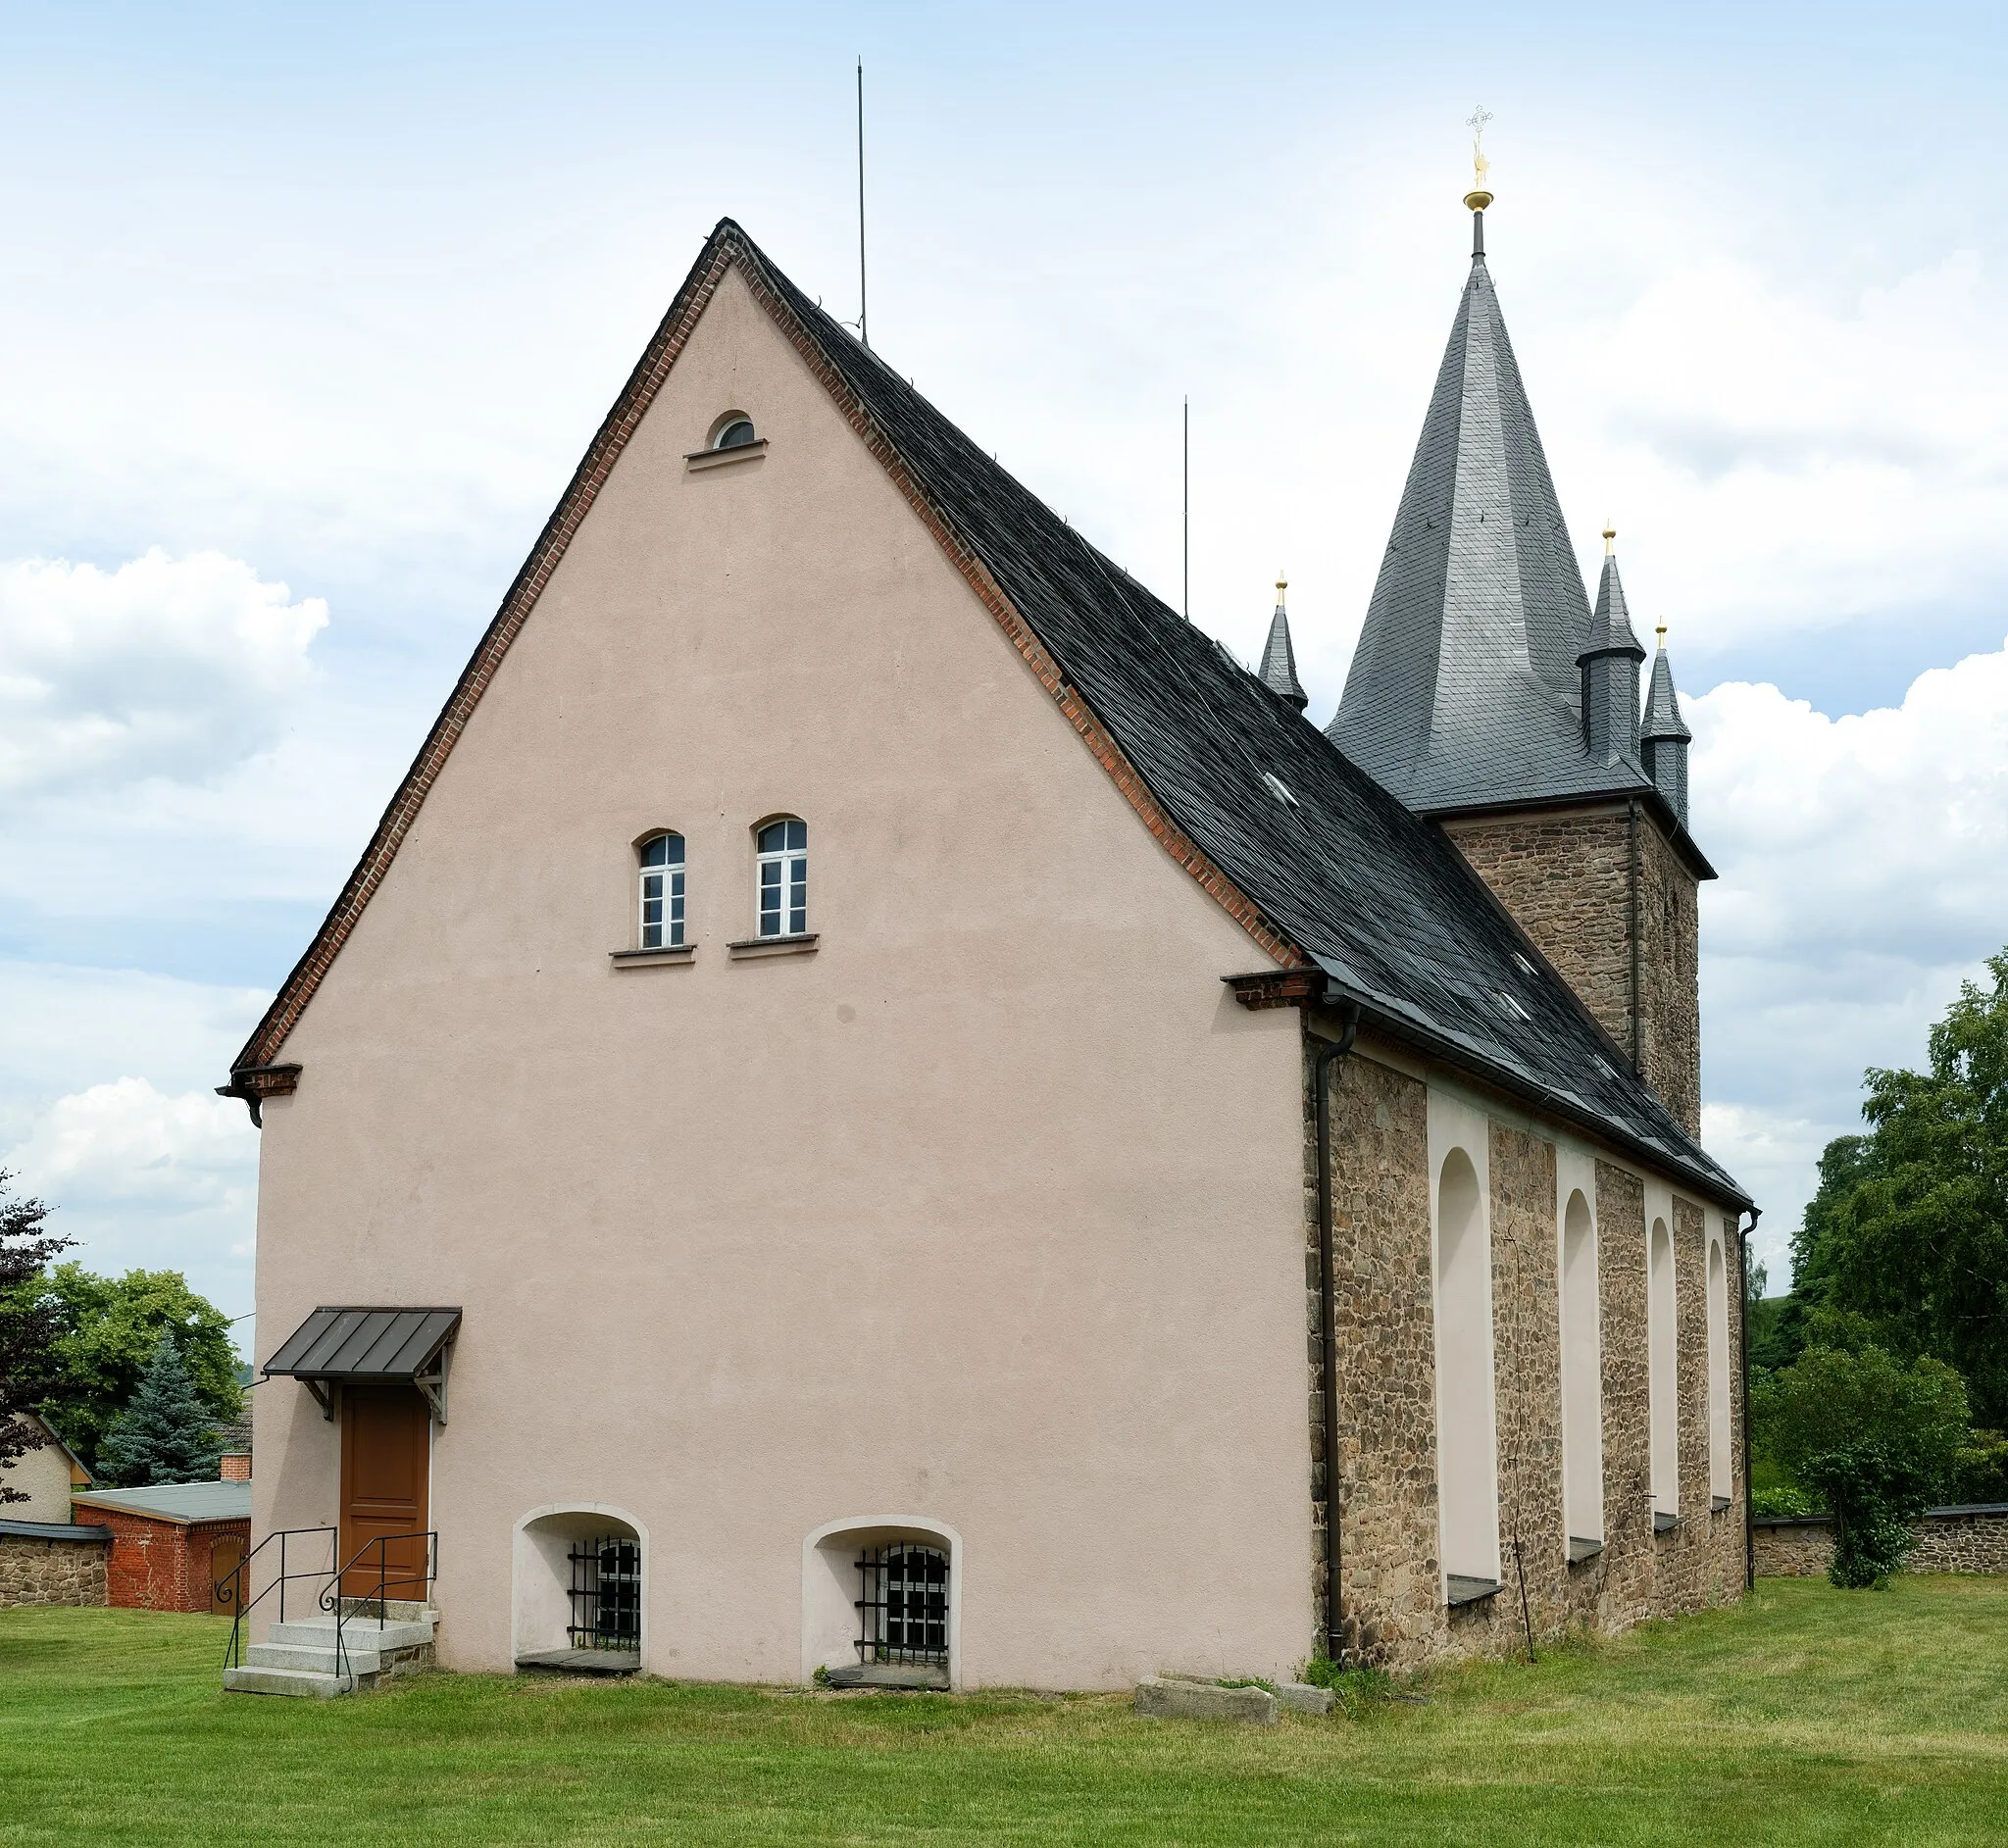 Photo showing: This image shows the St. Marienkirche ("St. Marien Church") in the district Stangengrün in Kirchberg, Saxony, Germany. It is a seven segment panoramic image.